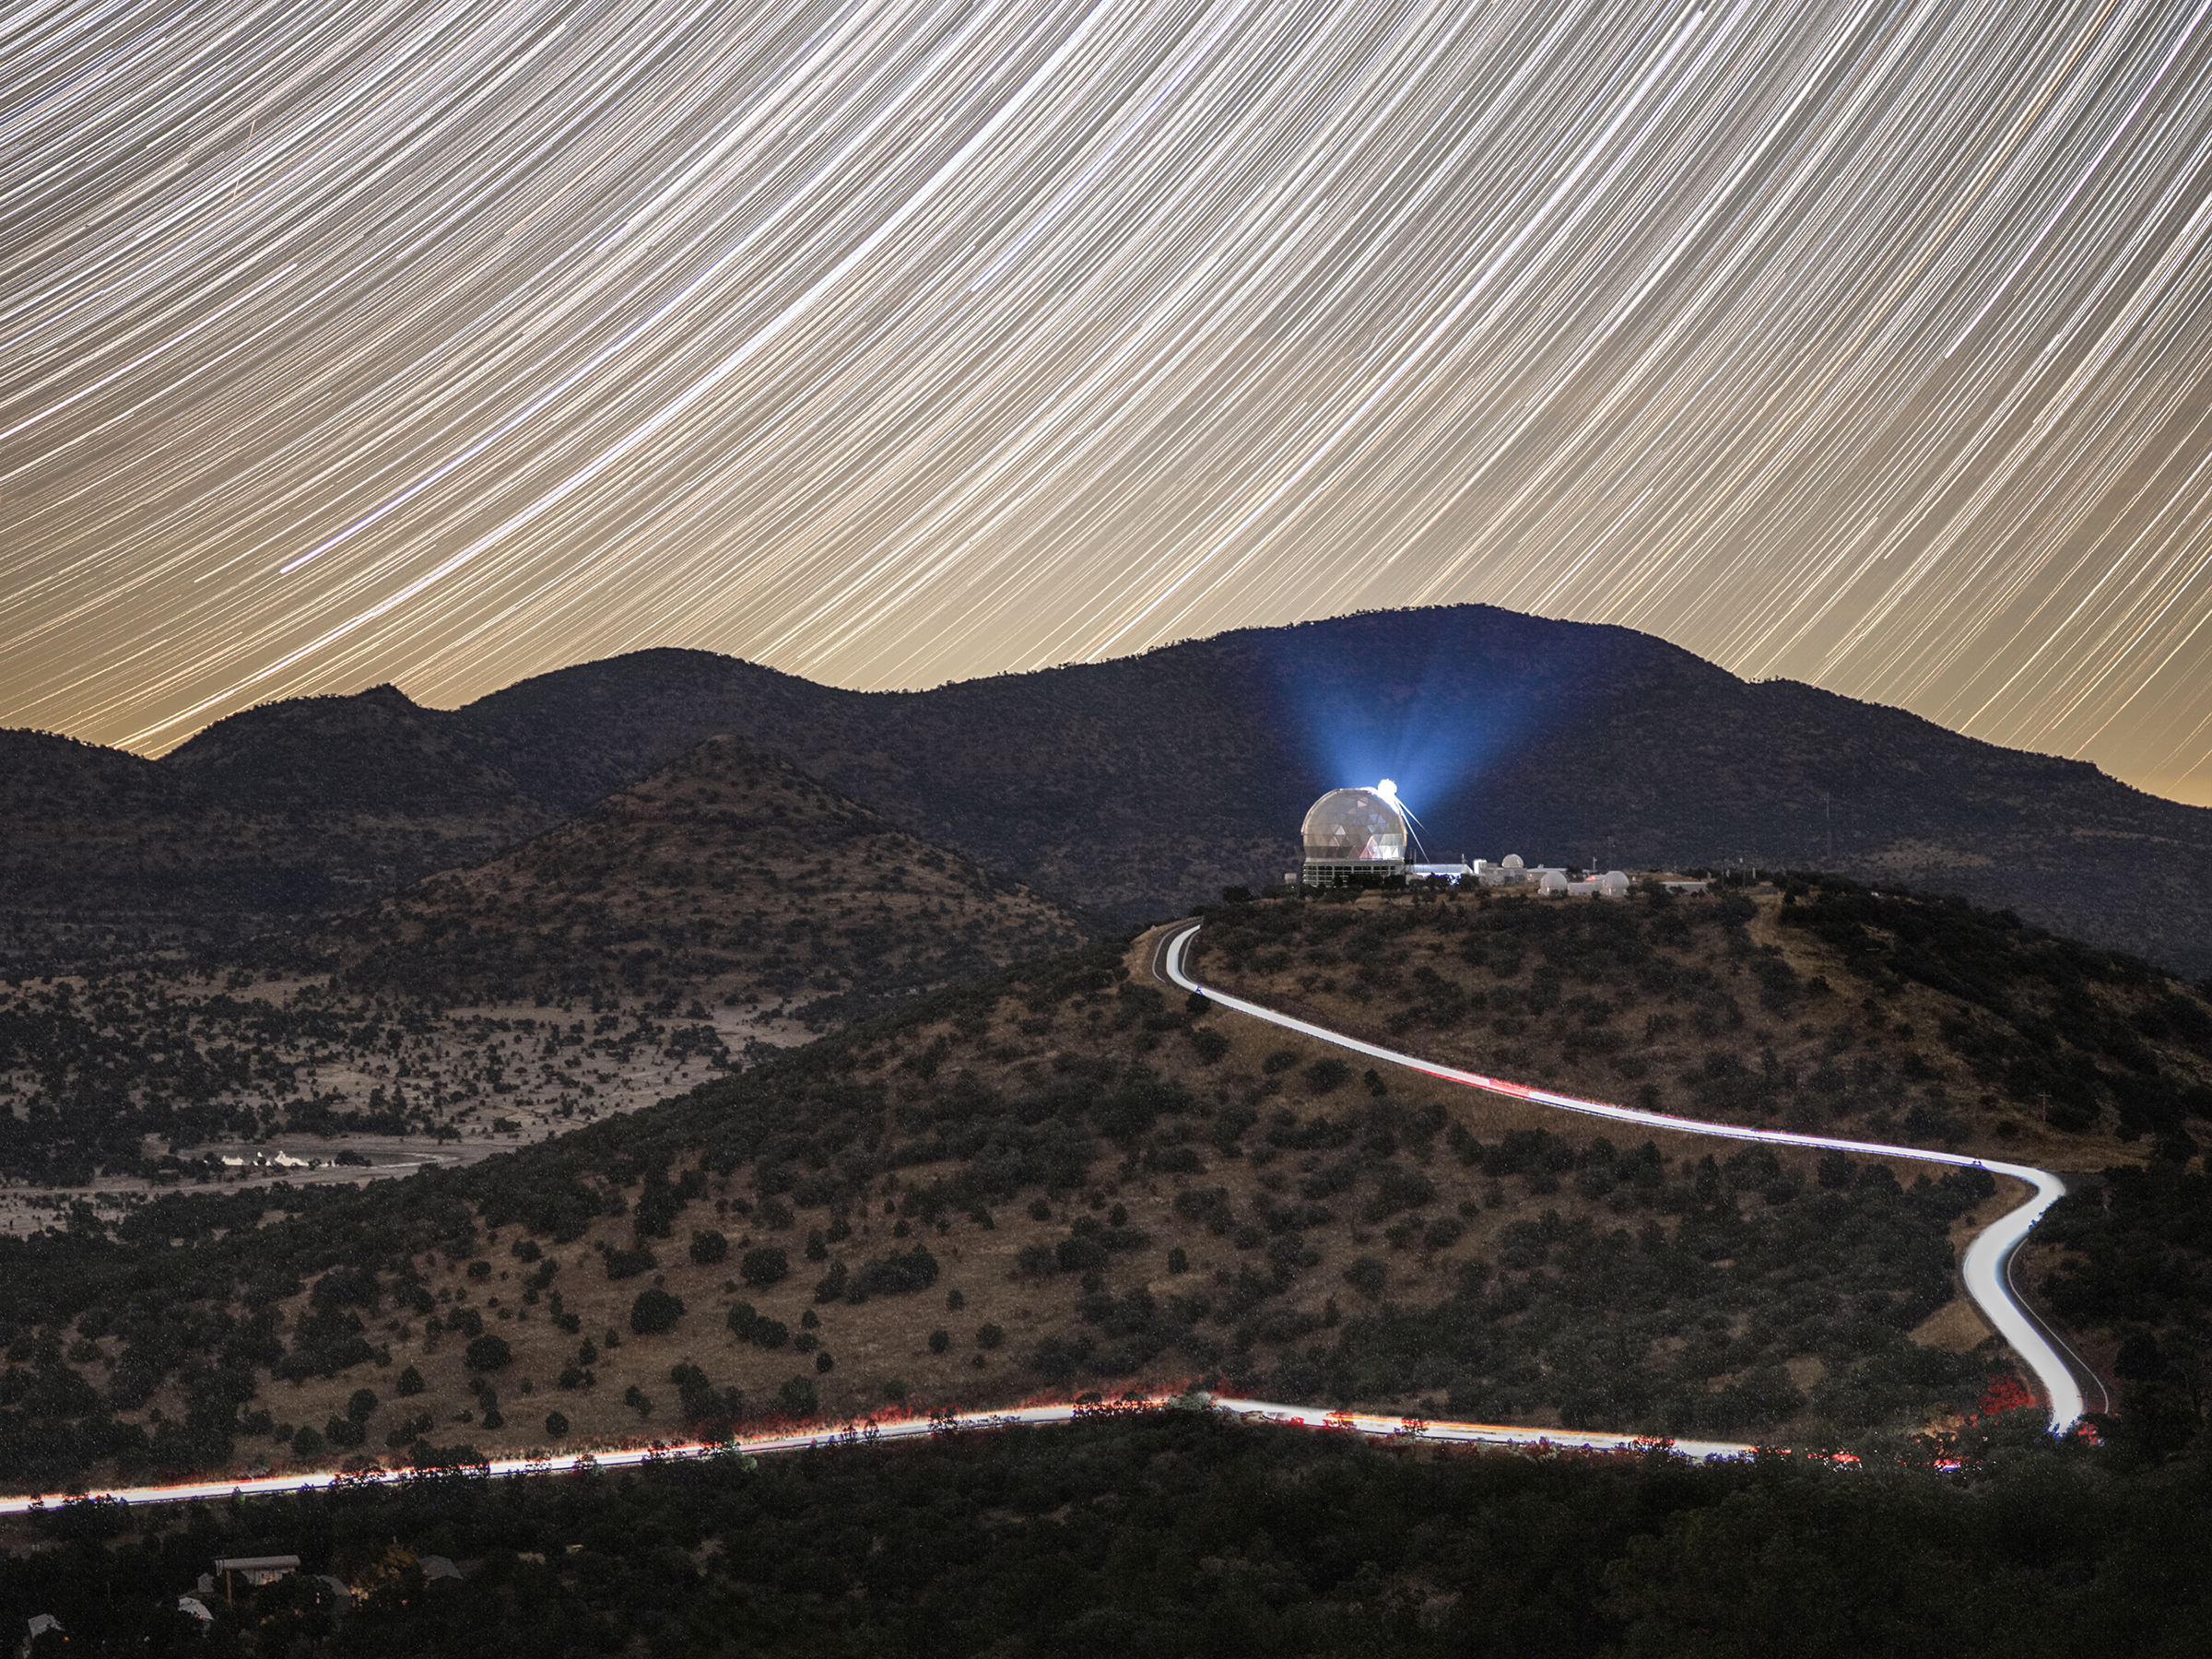 Time-lapse photo of the Hobby-Eberly Telescope in West Texas with star trails in the sky.